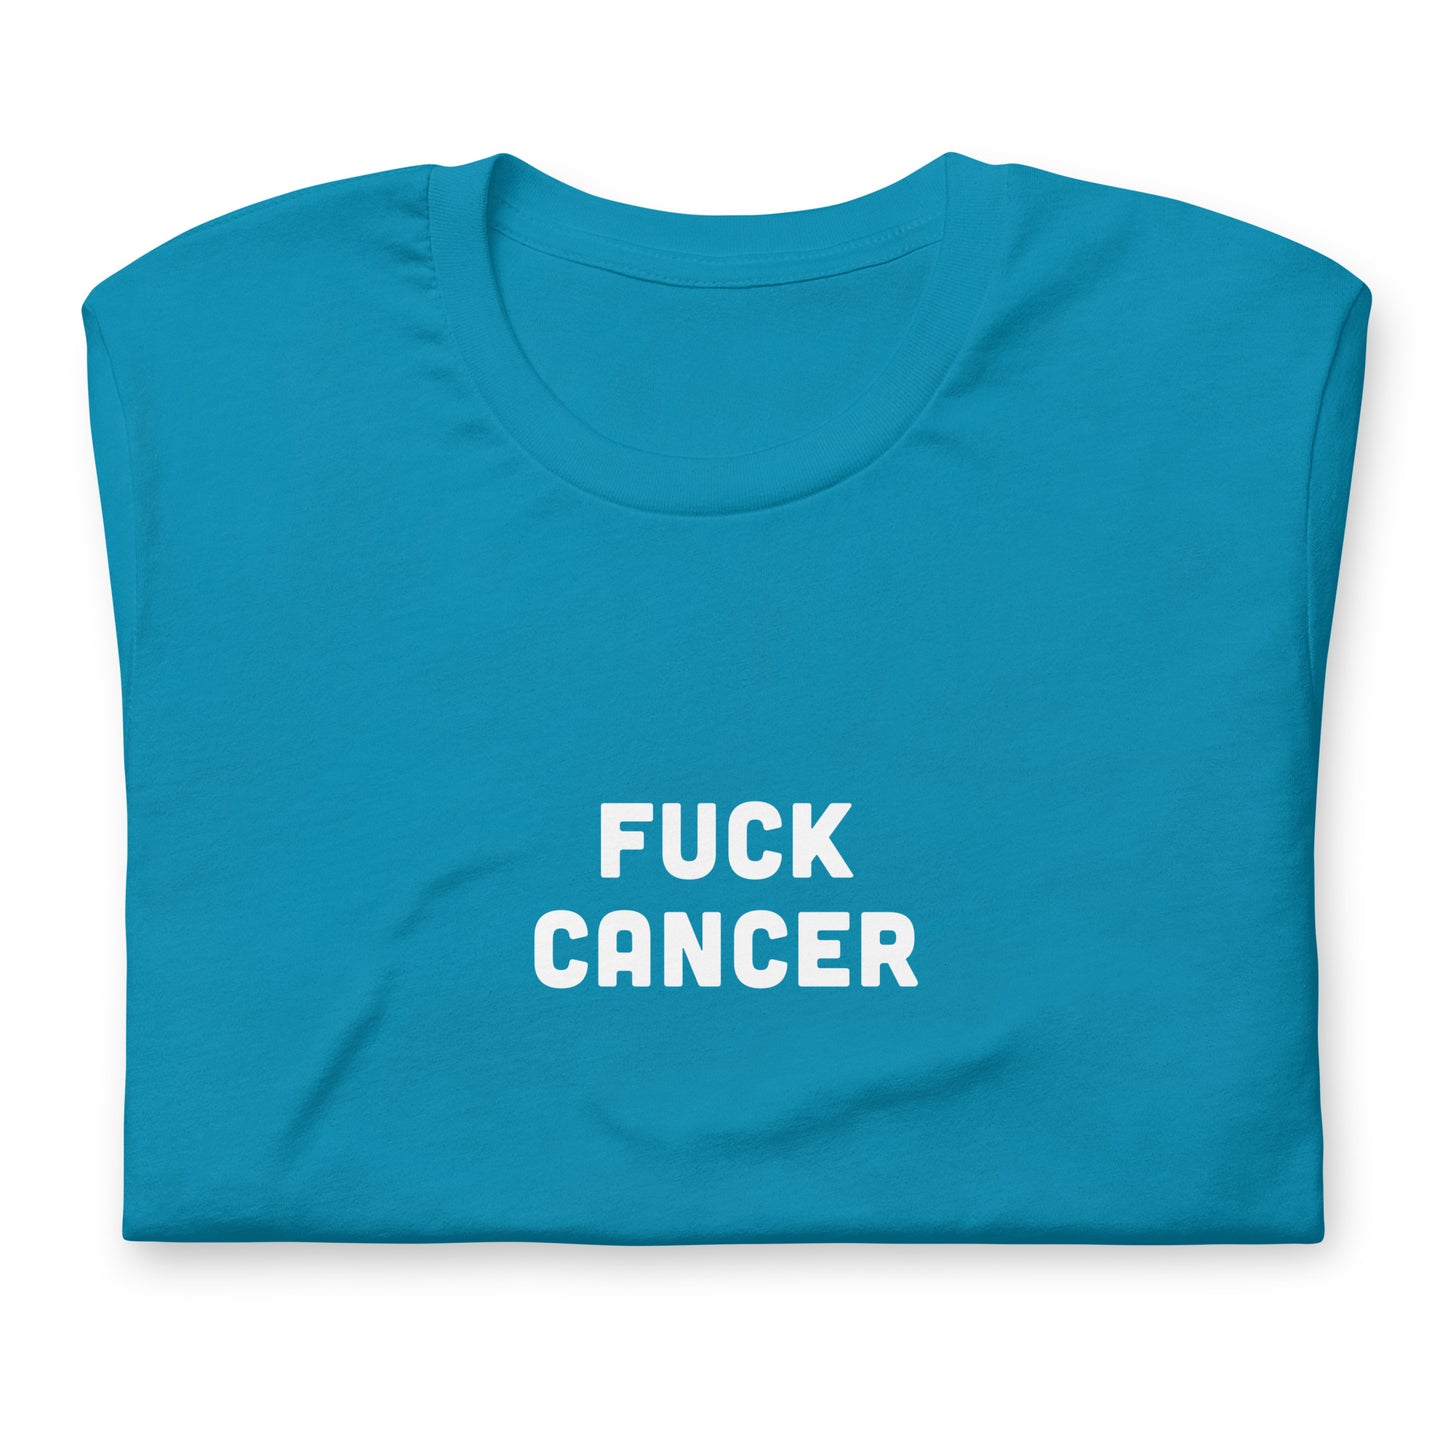 Fuck Cancer T-Shirt Size M Color Navy